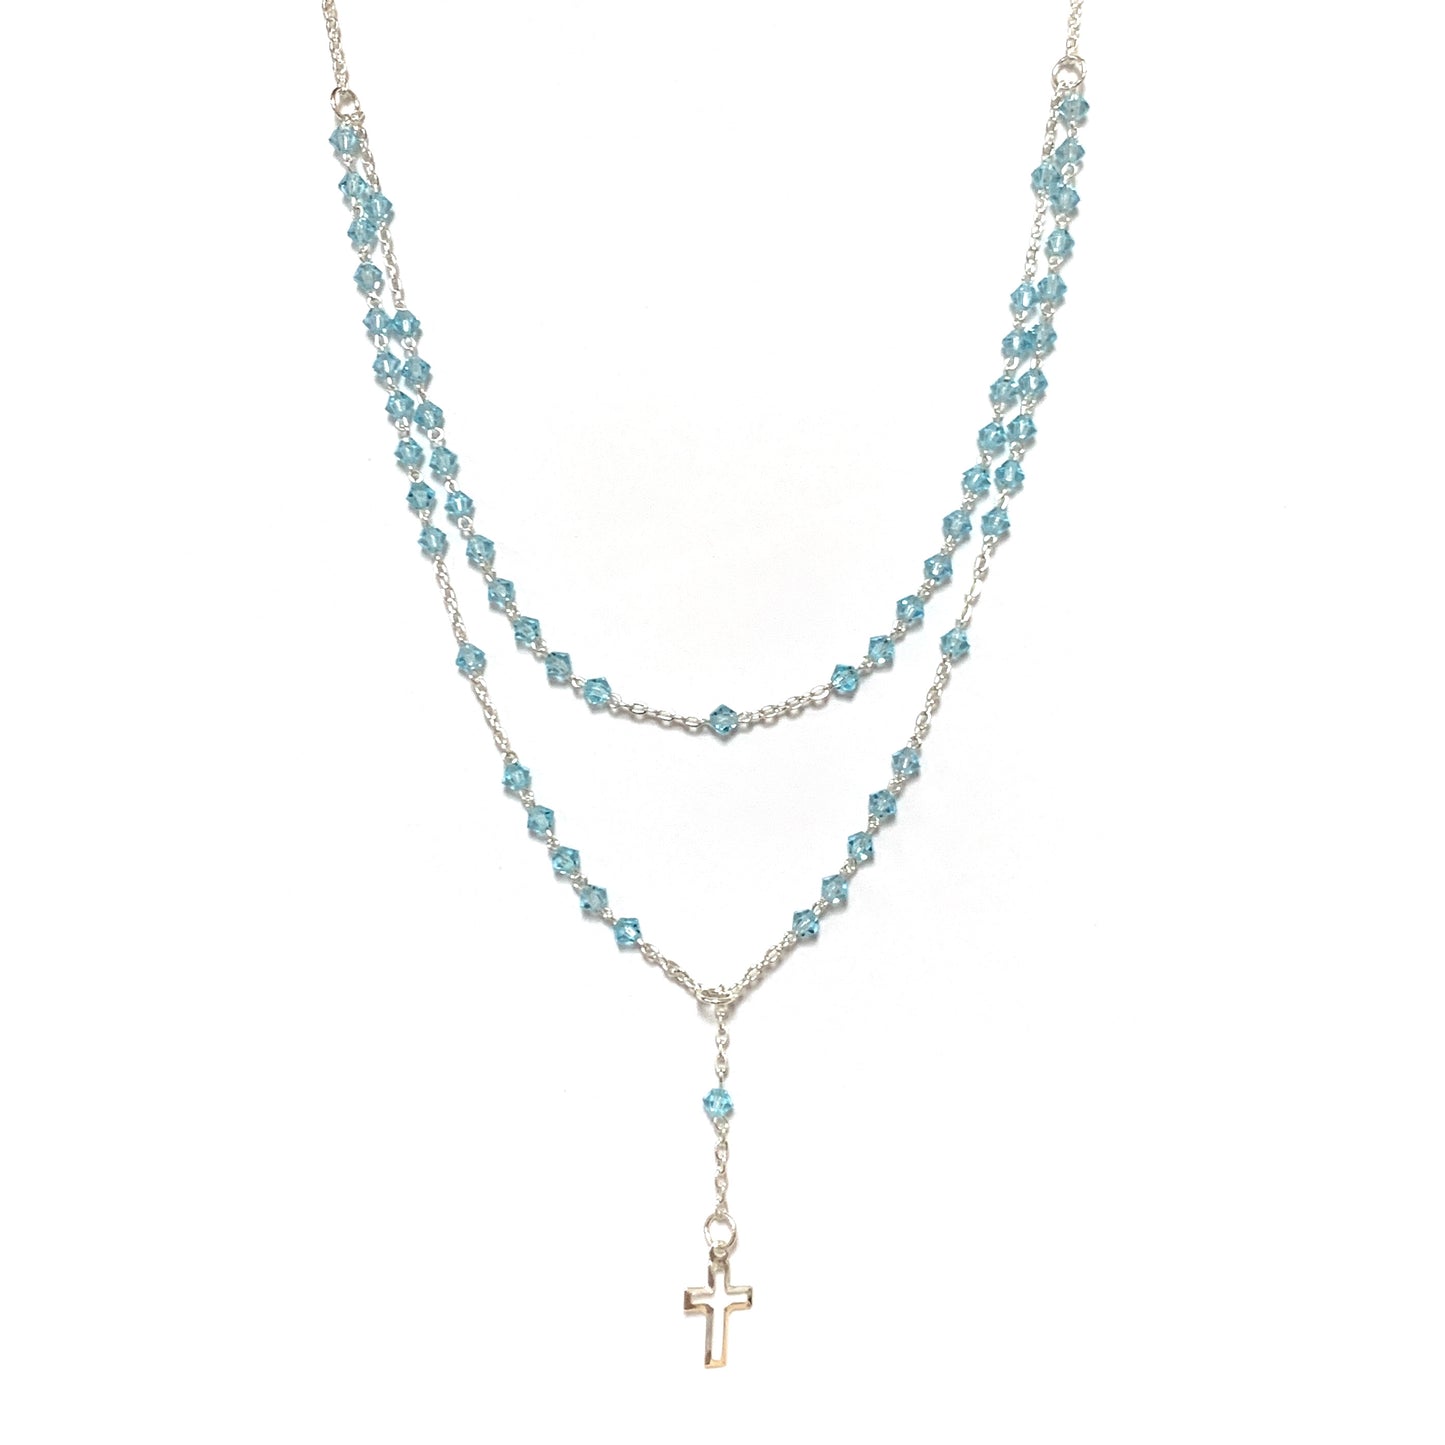 Silver and Crystal Rosary Necklace of Assorted Colors